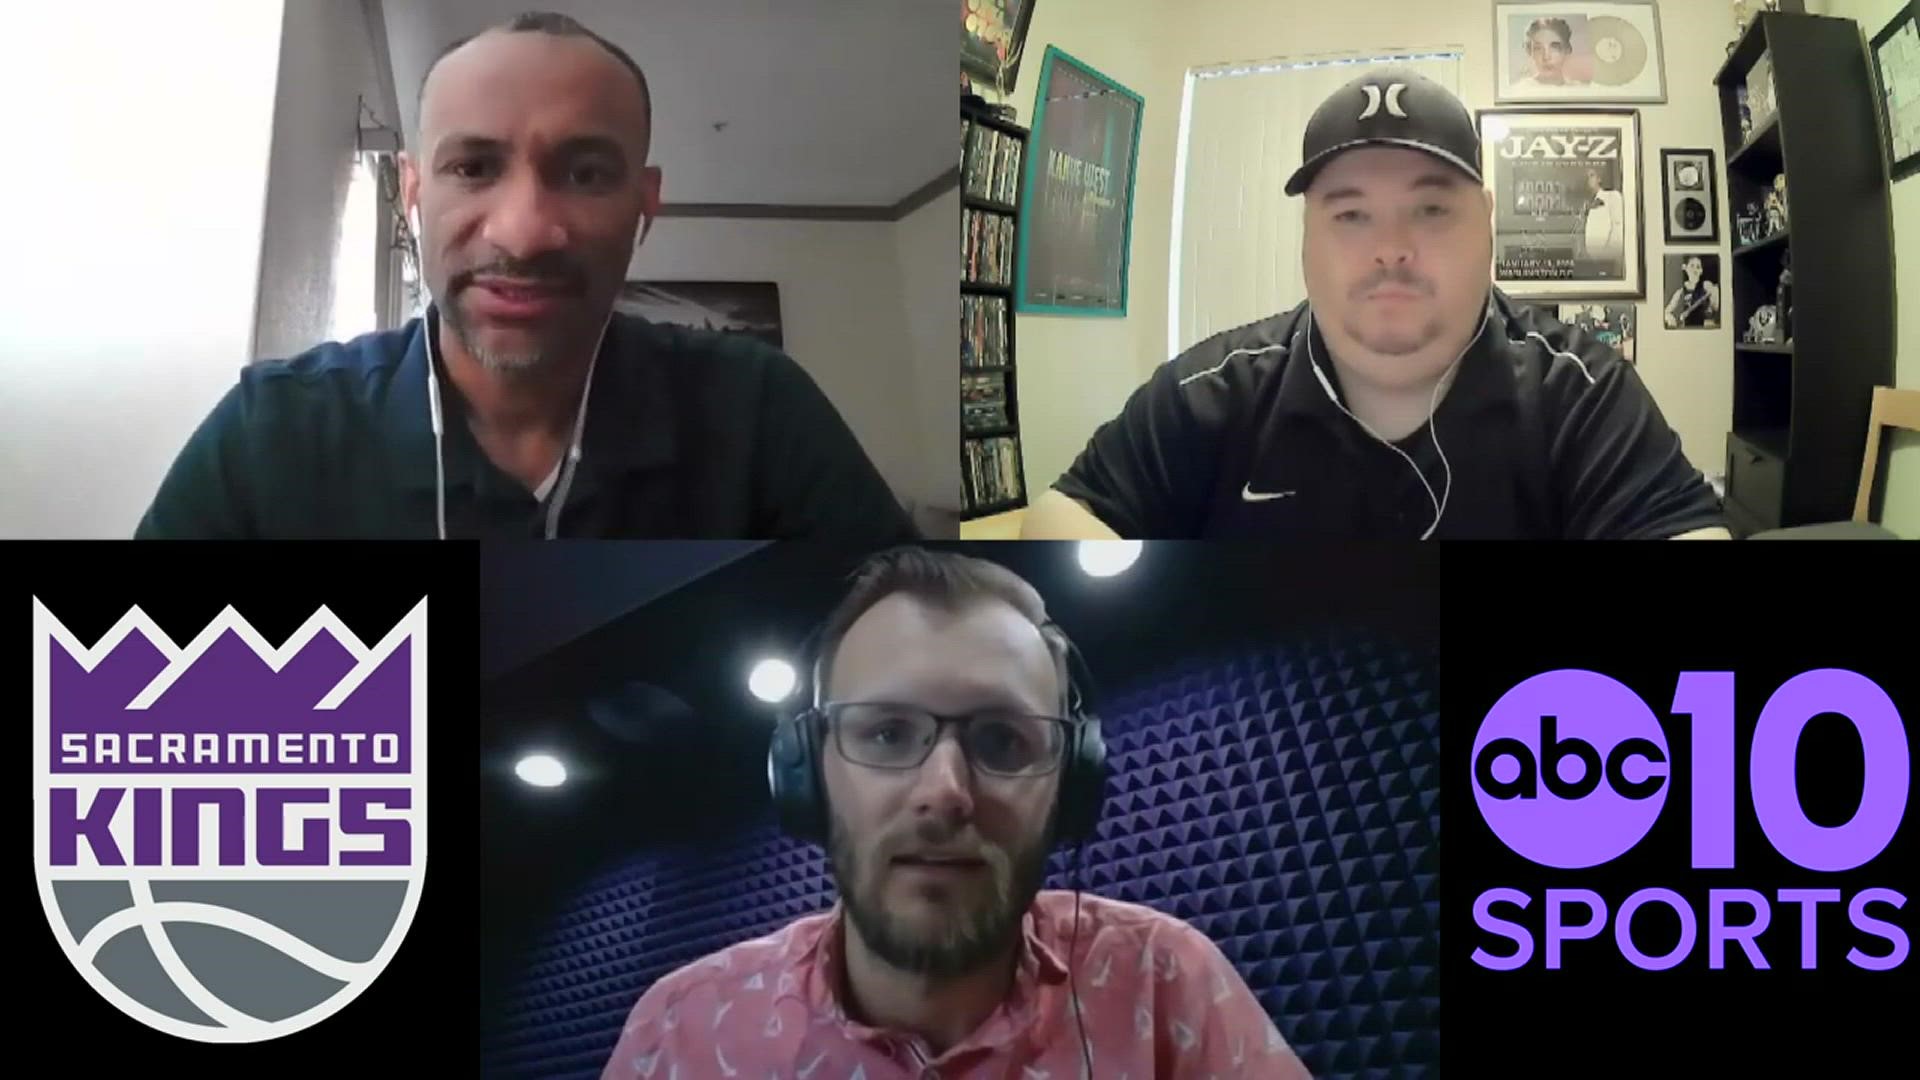 ABC10's Sean Cunningham, Kevin John and "Locked on Kings Podcast" host Matt George preview the Thursday's NBA Draft from the the standpoint of the Sacramento Kings.